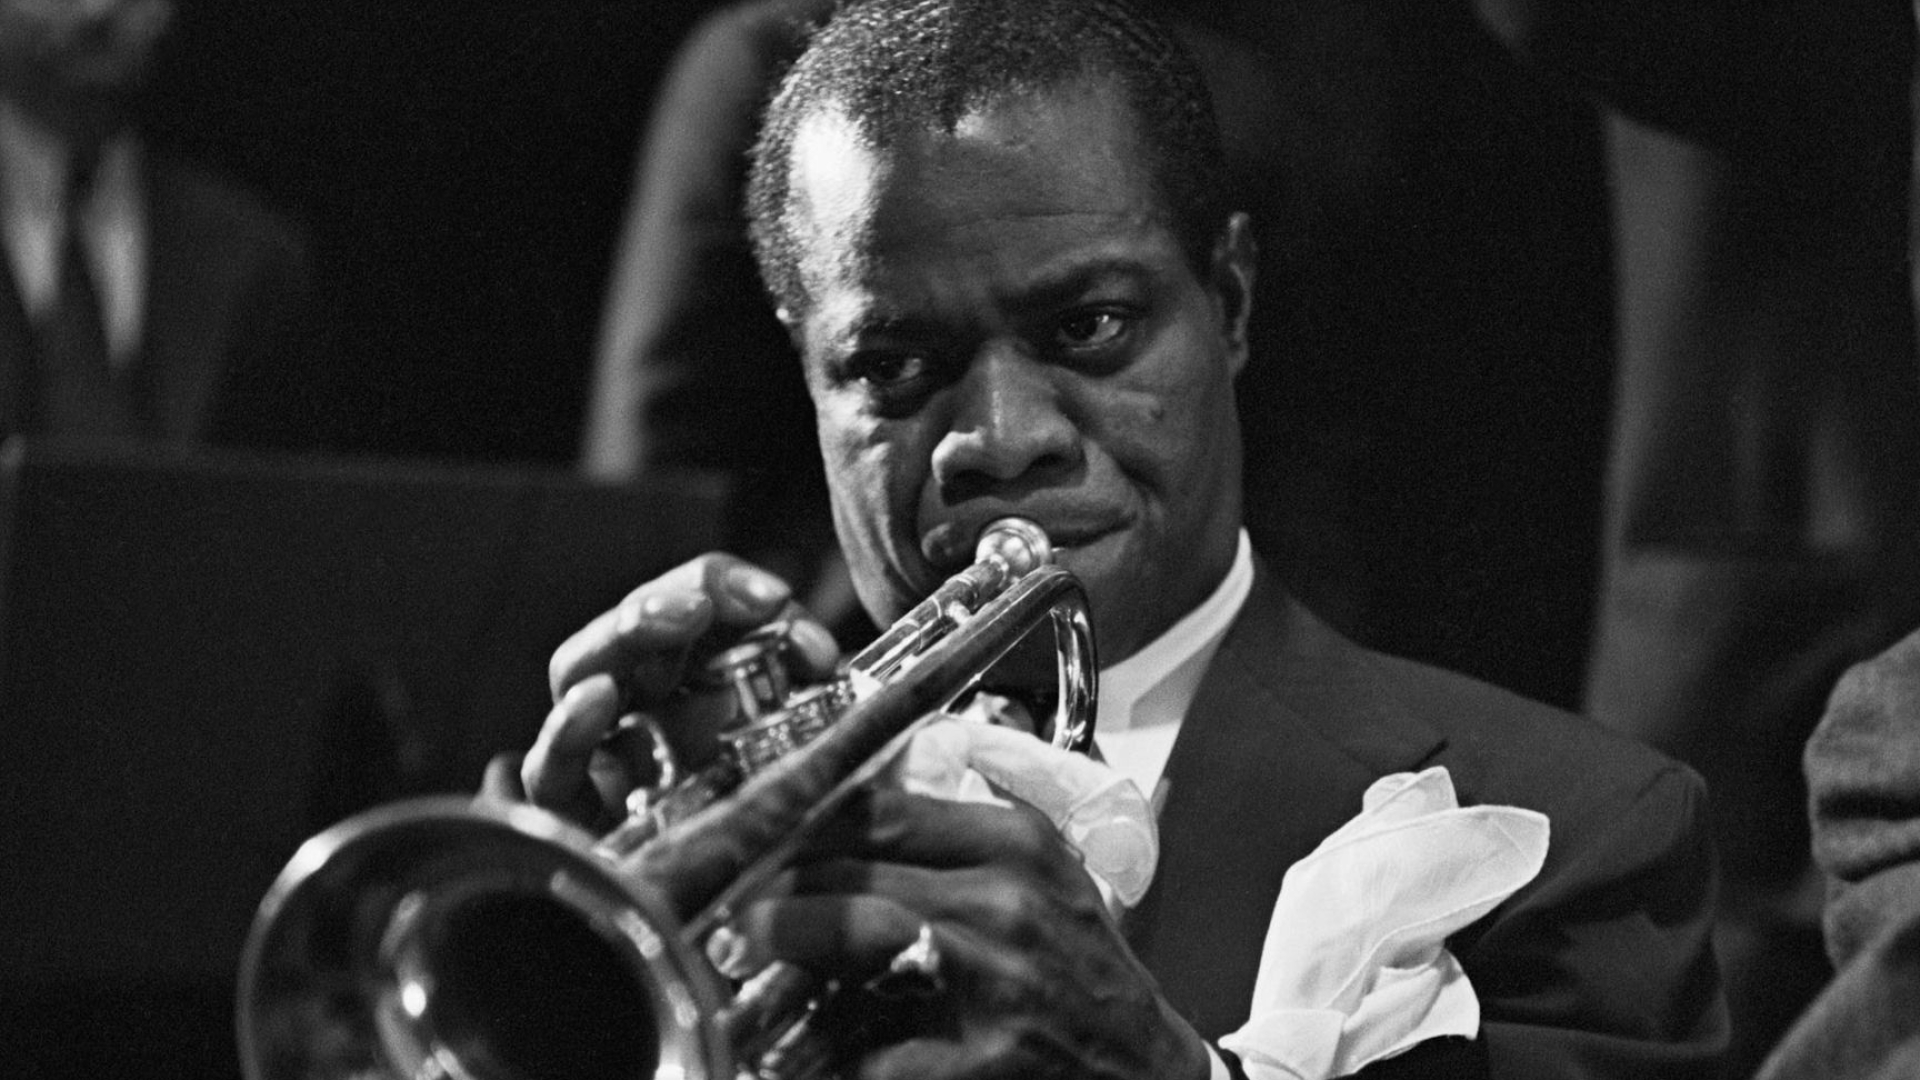 Louis Armstrong, Music wallpapers, HQ pictures, Jazz music icon, 1920x1080 Full HD Desktop